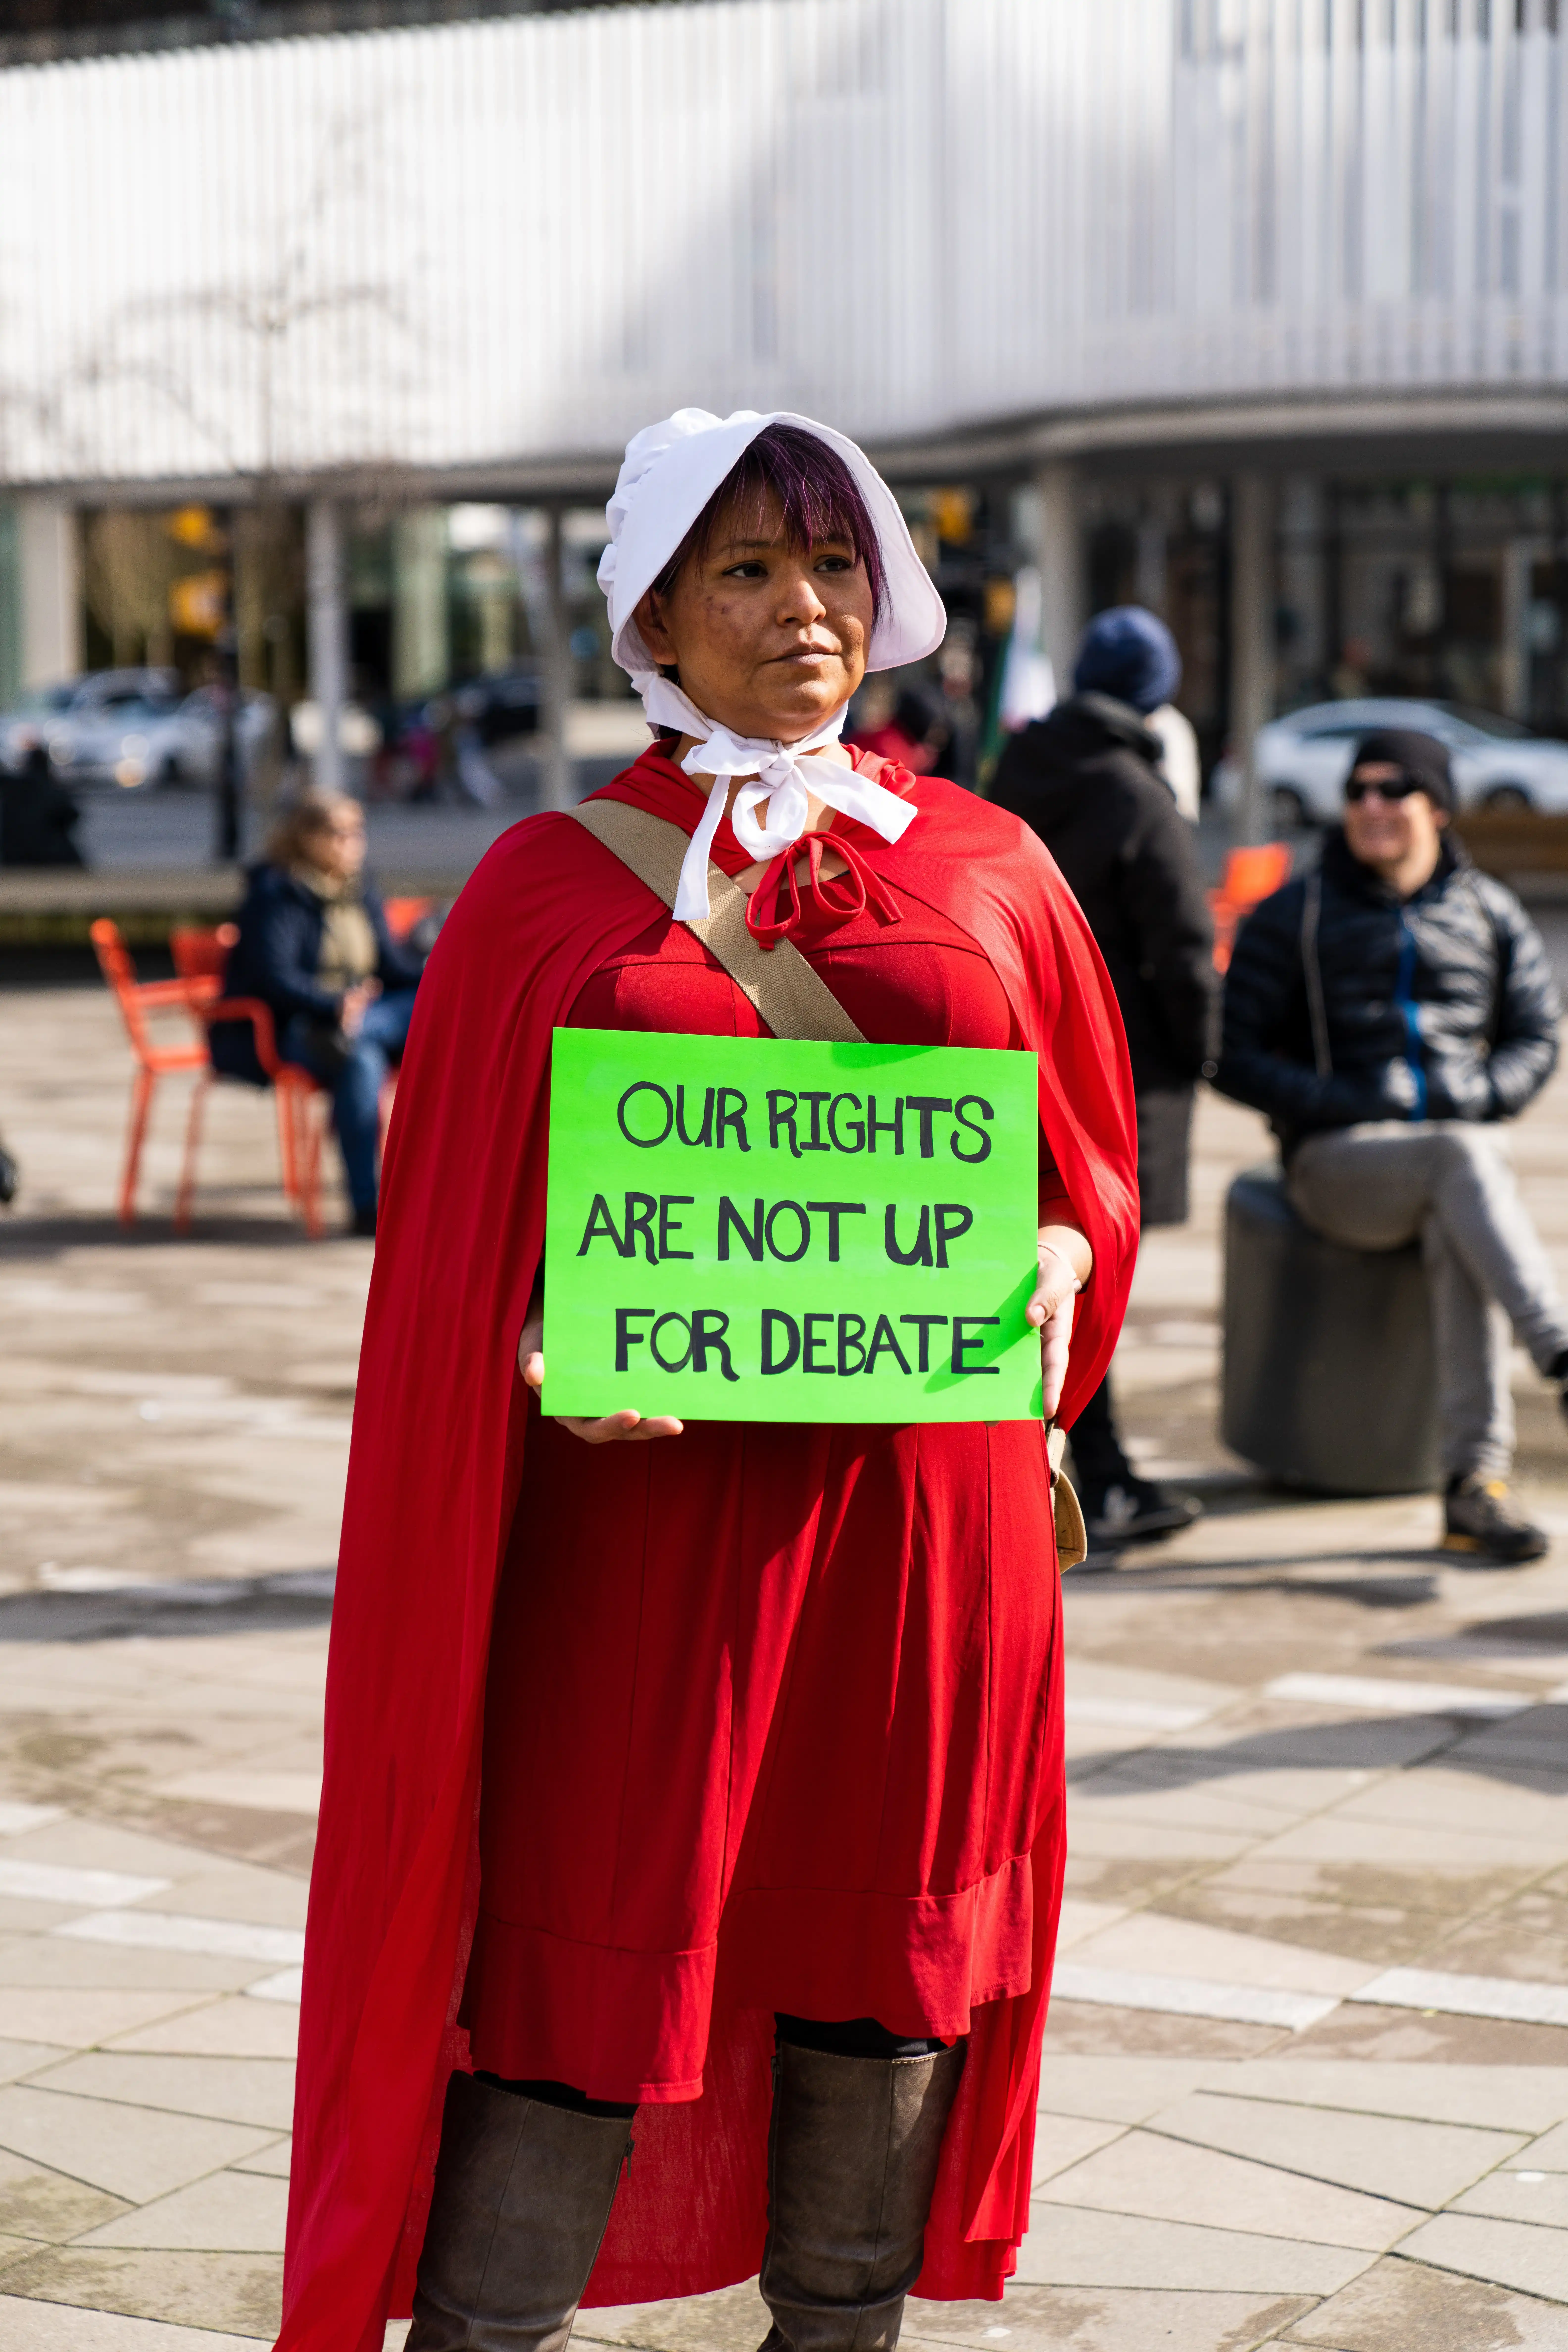 This is an image of an attendee from the 2023 march. They are holding a sign that reads Our Rights are not up for debate. 